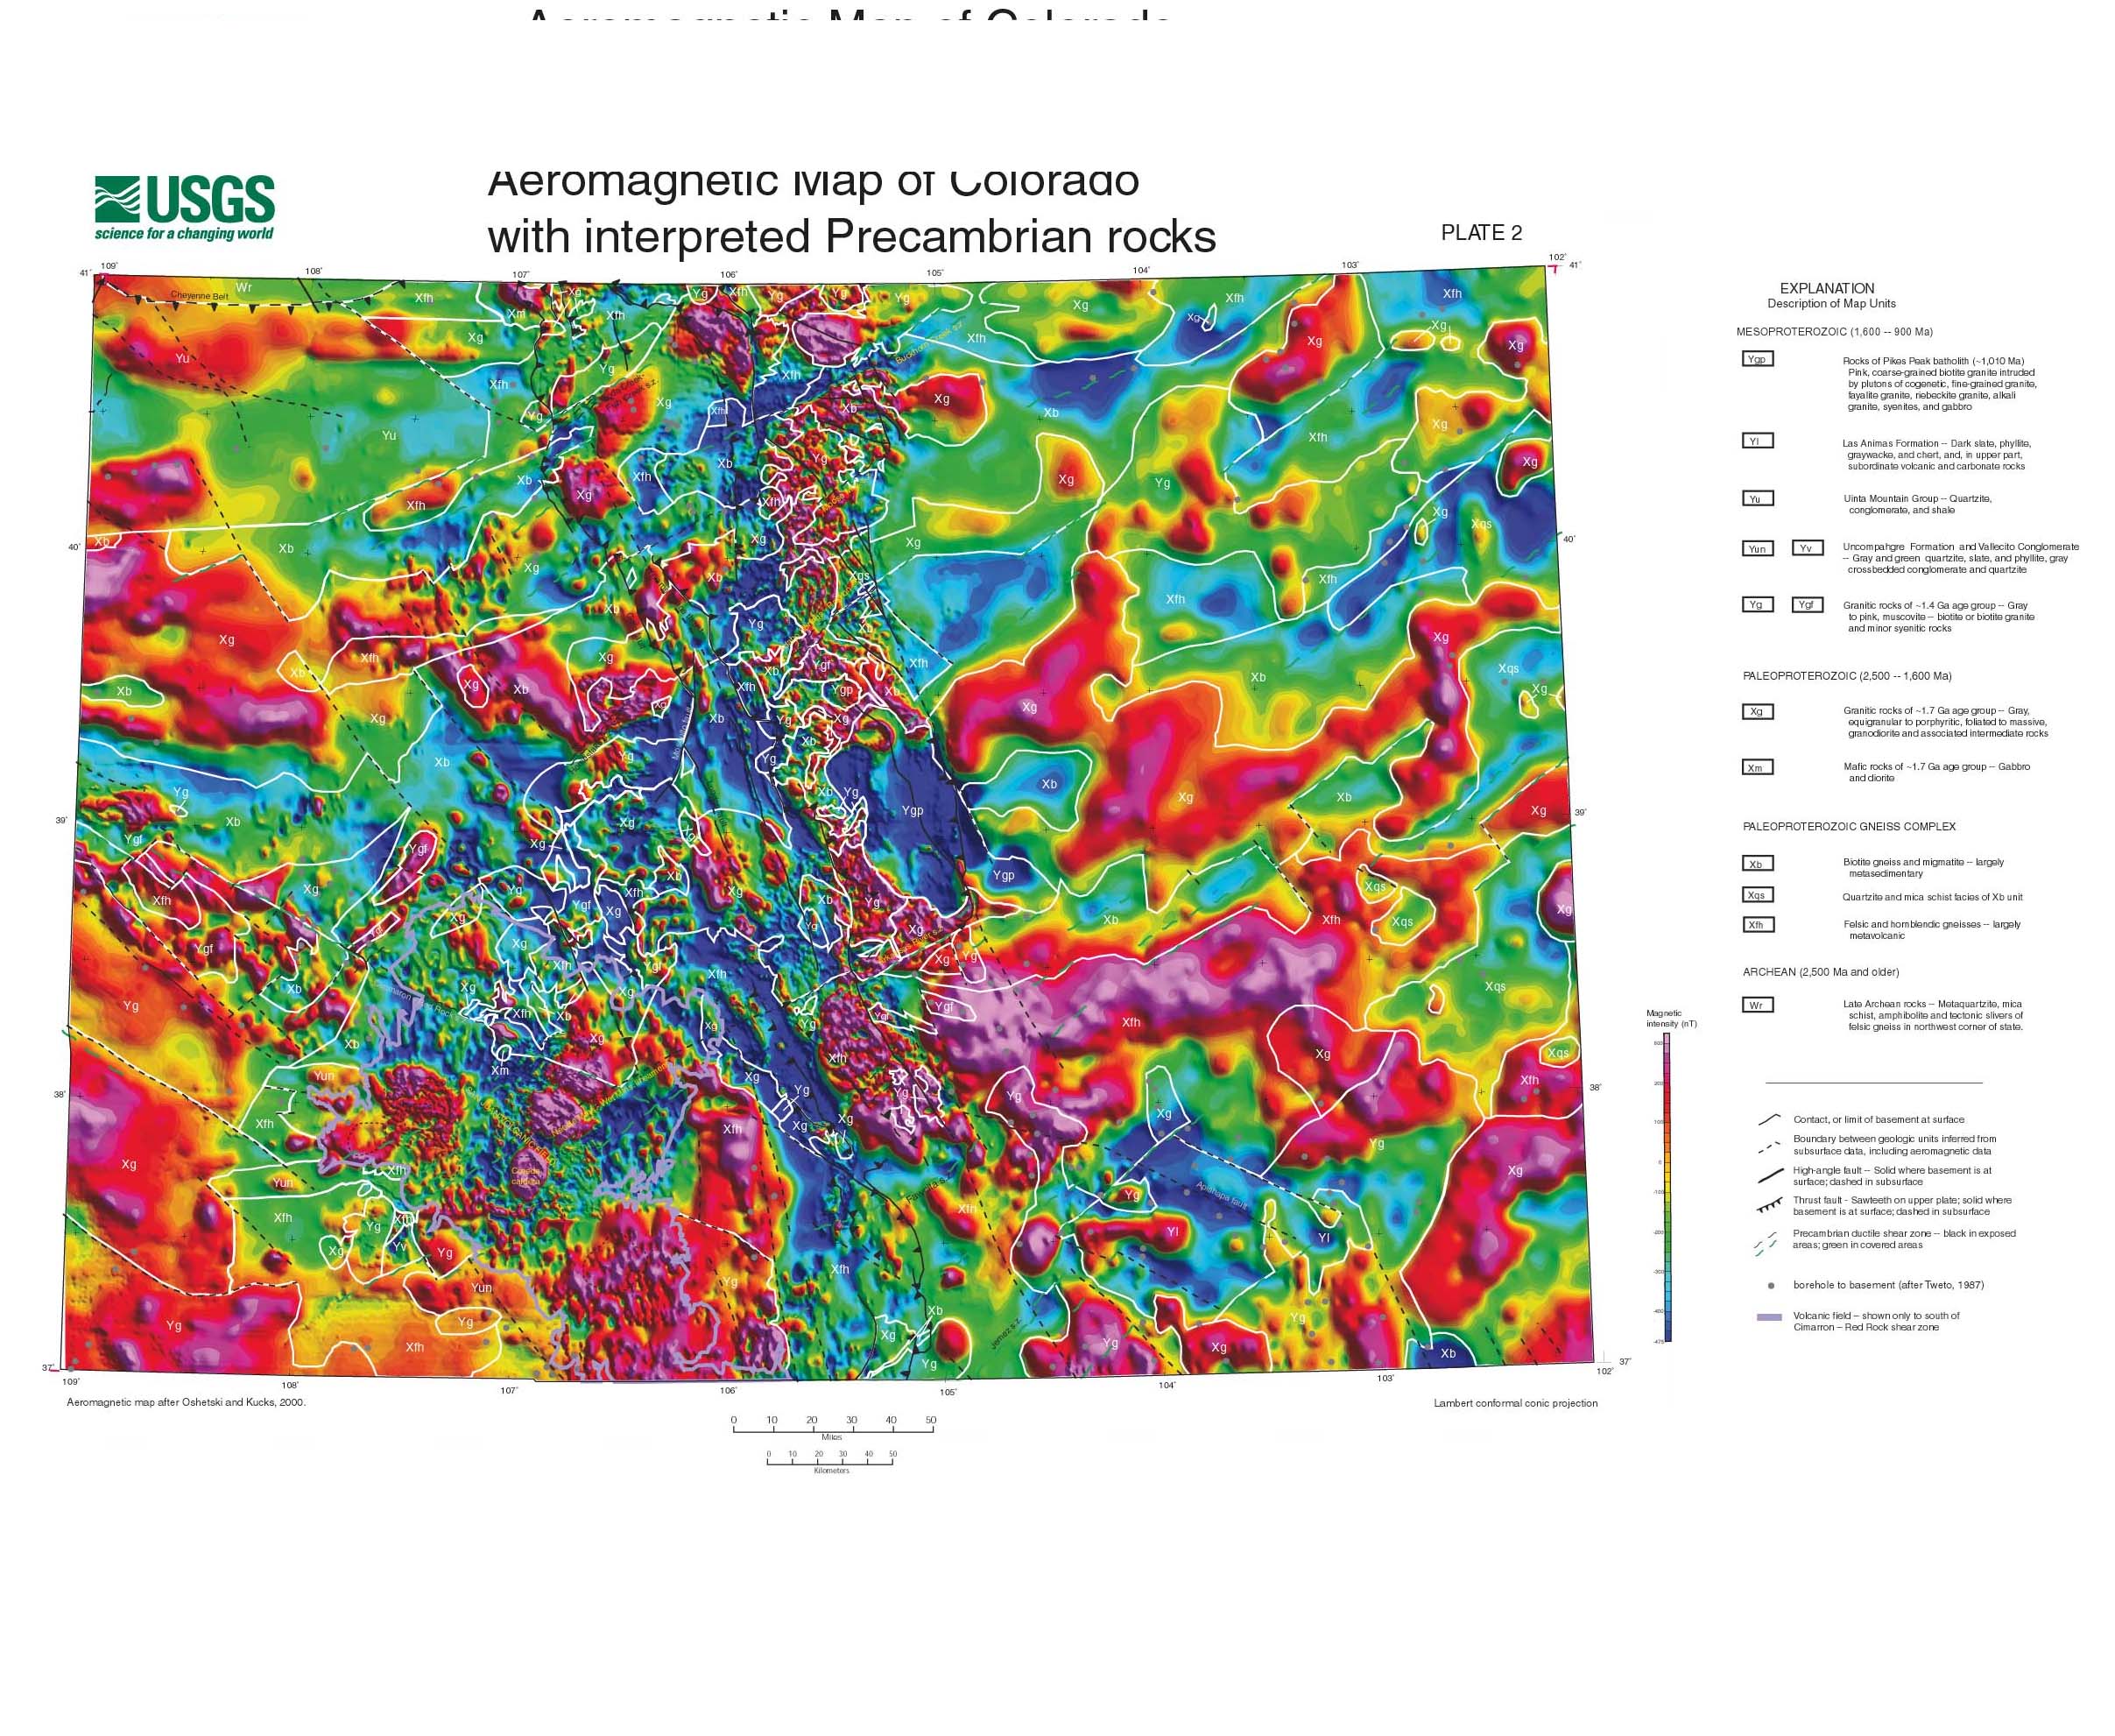 Basement mapshowing geologic-geophysical domains of Colorado over magnetic map